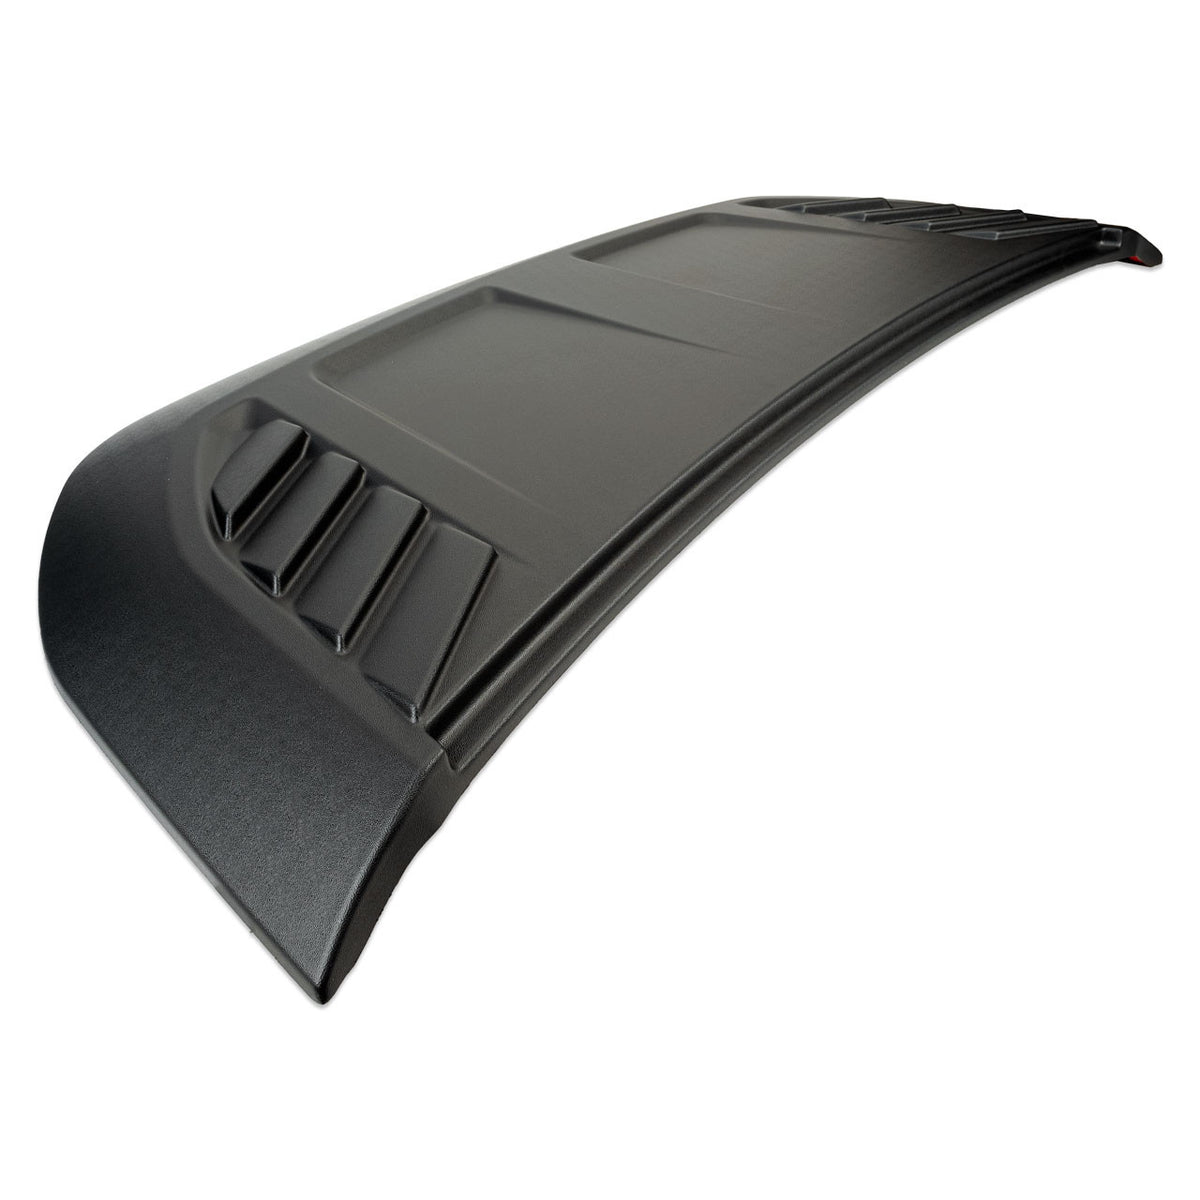 IAG I-Line Non-Functional Hood Scoop for 2021+ Ford Bronco